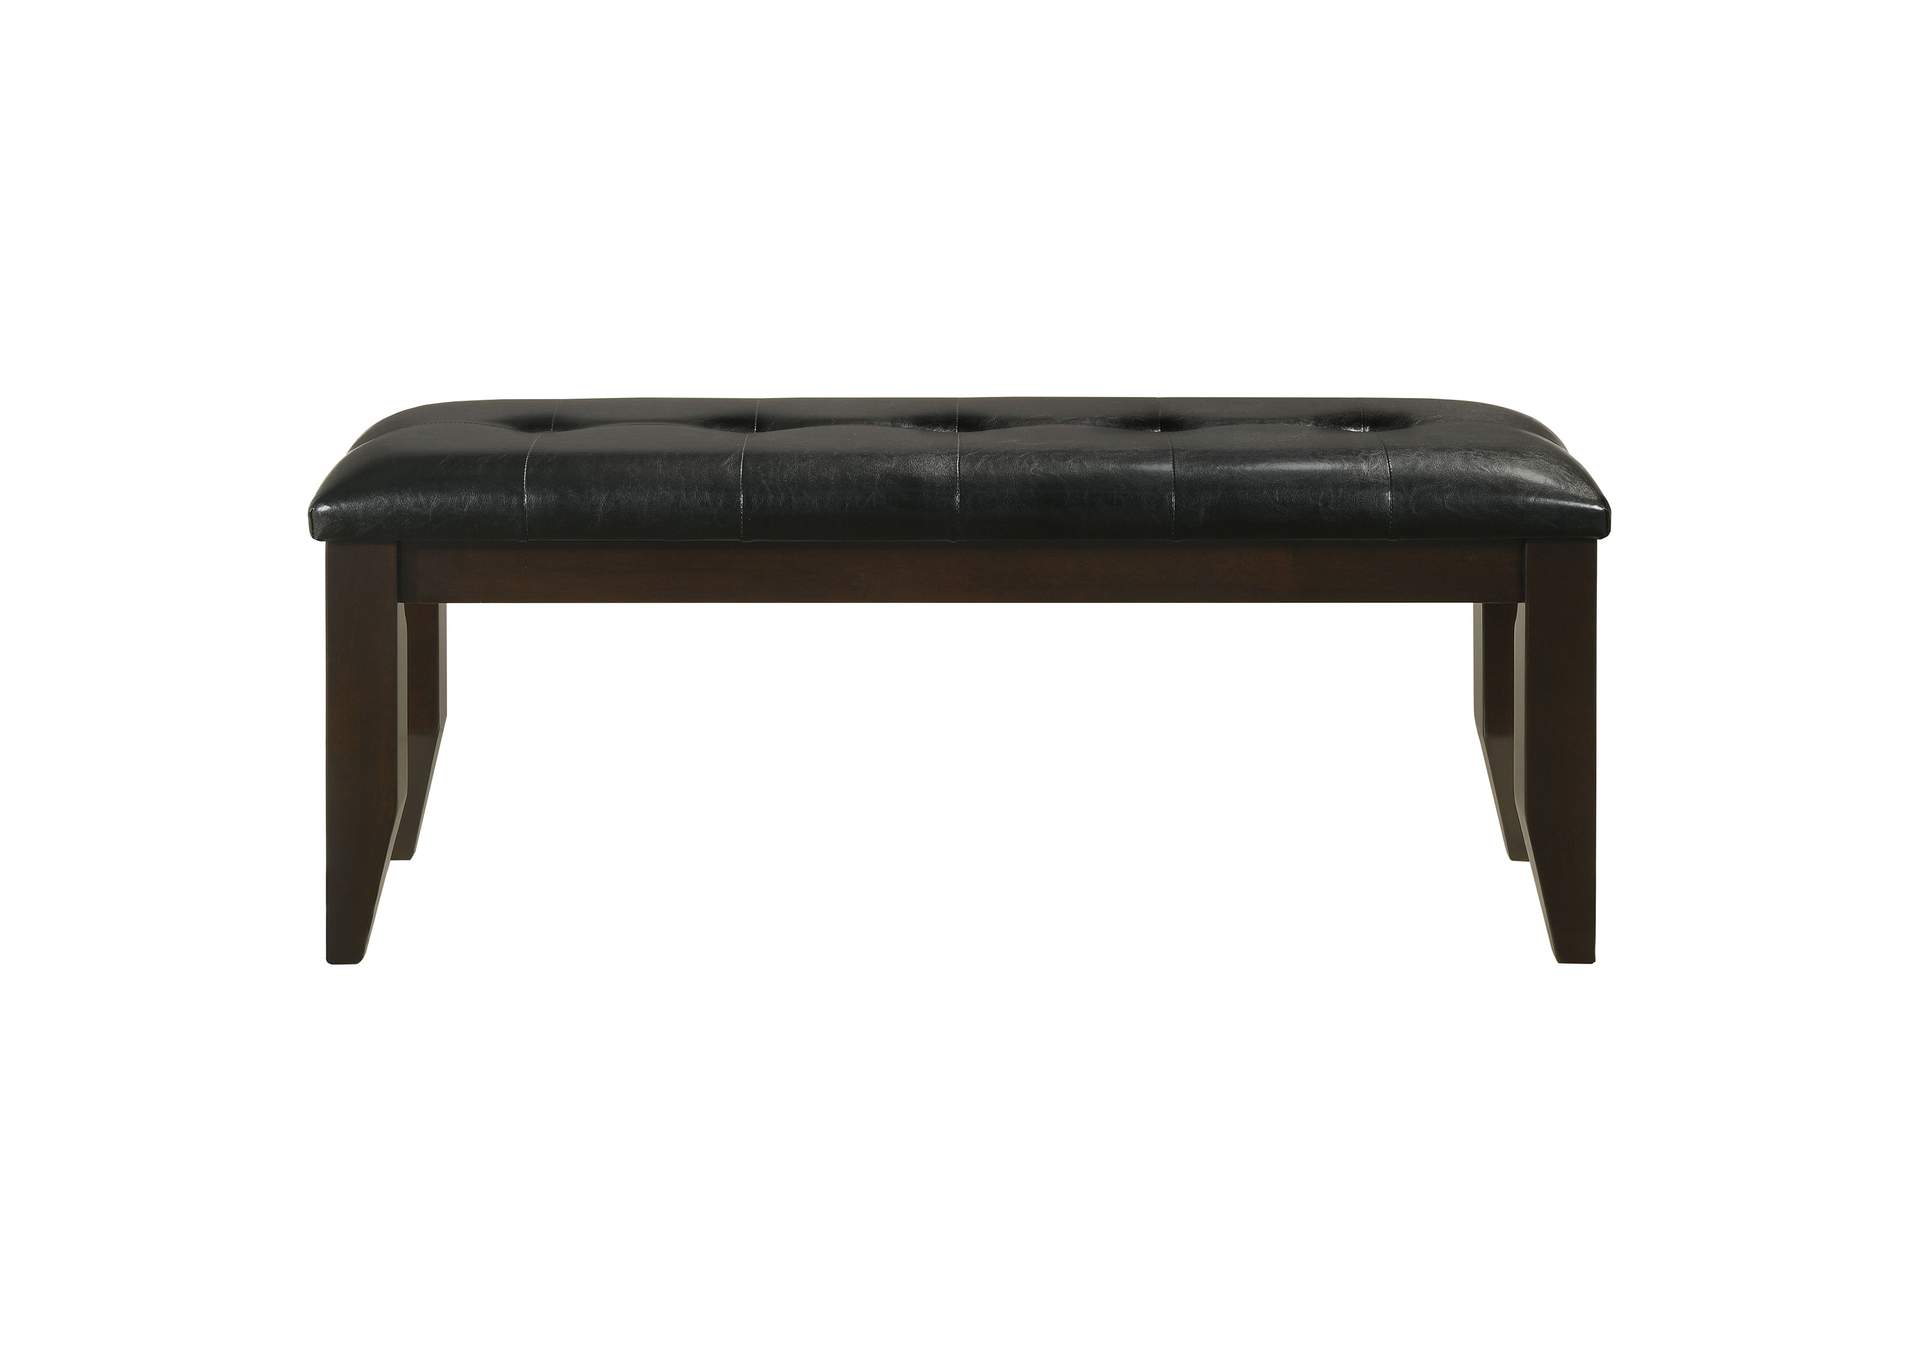 Dalila Tufted Upholstered Dining Bench Cappuccino and Black,Coaster Furniture